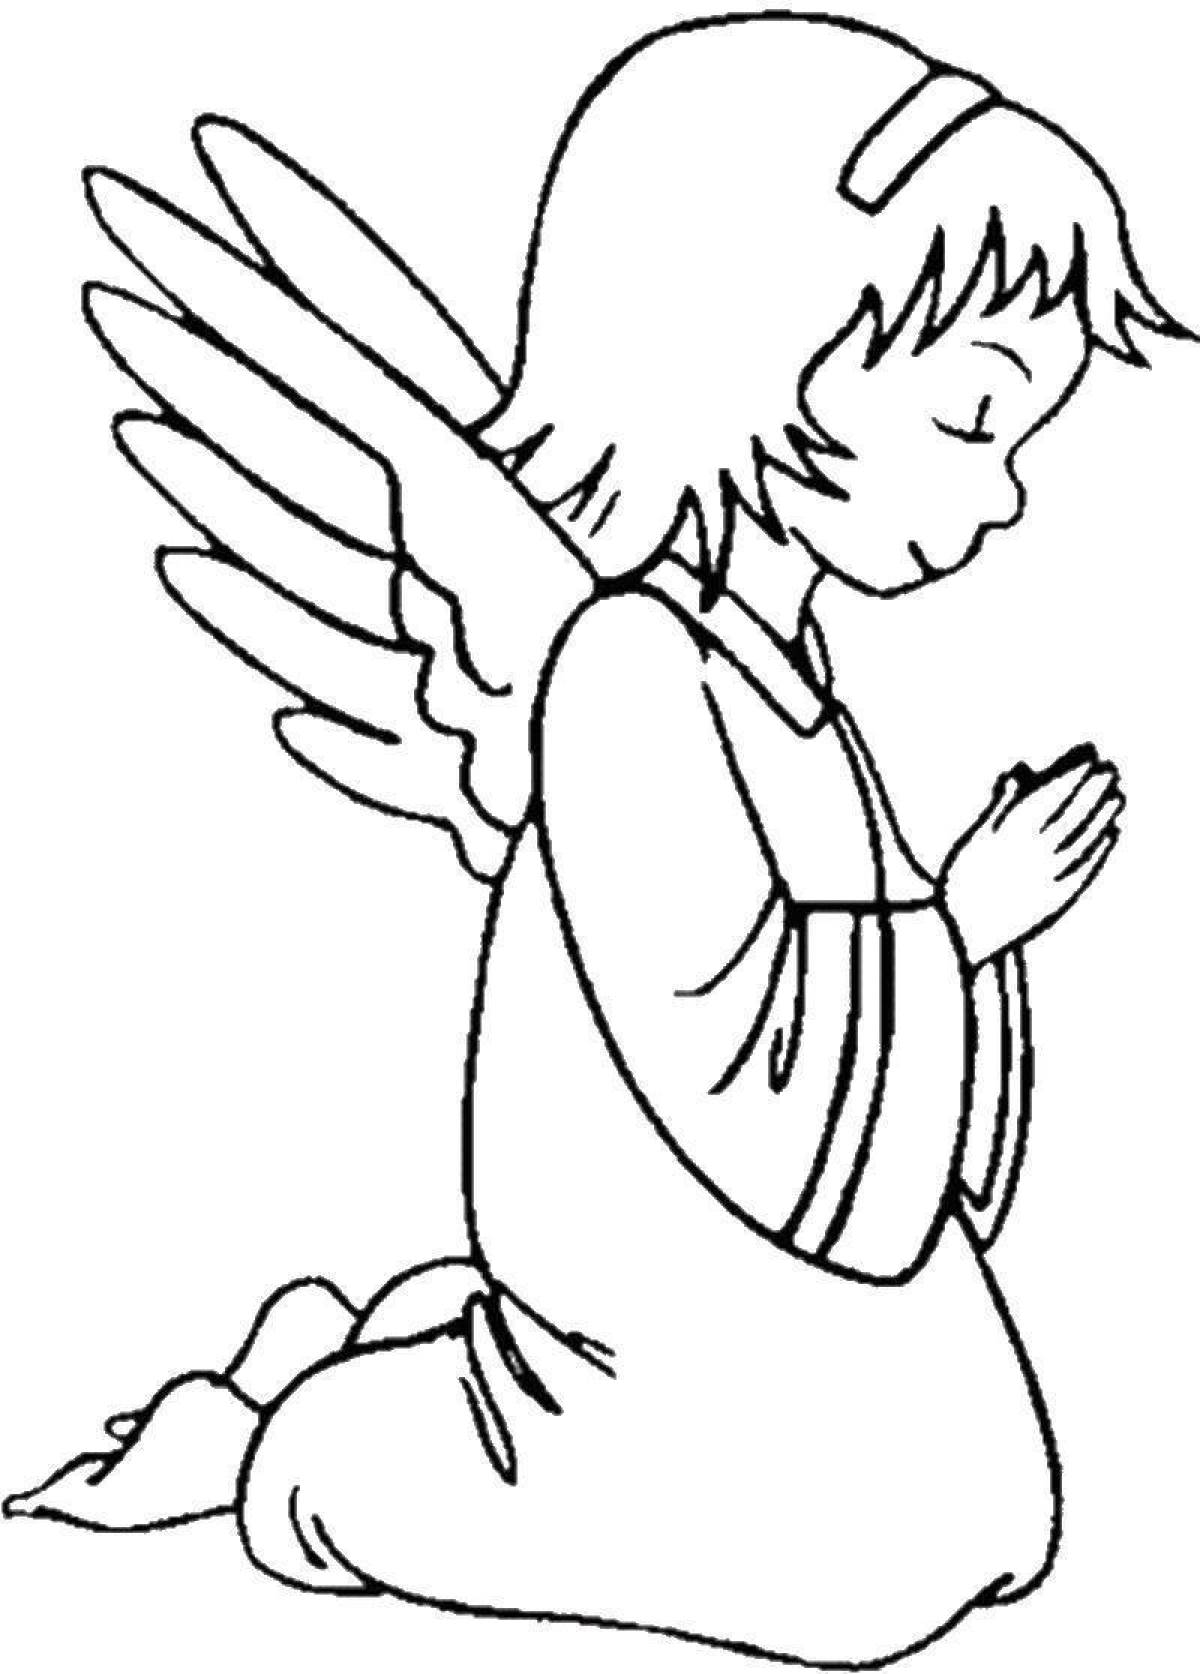 Shining angel with wings coloring book for kids